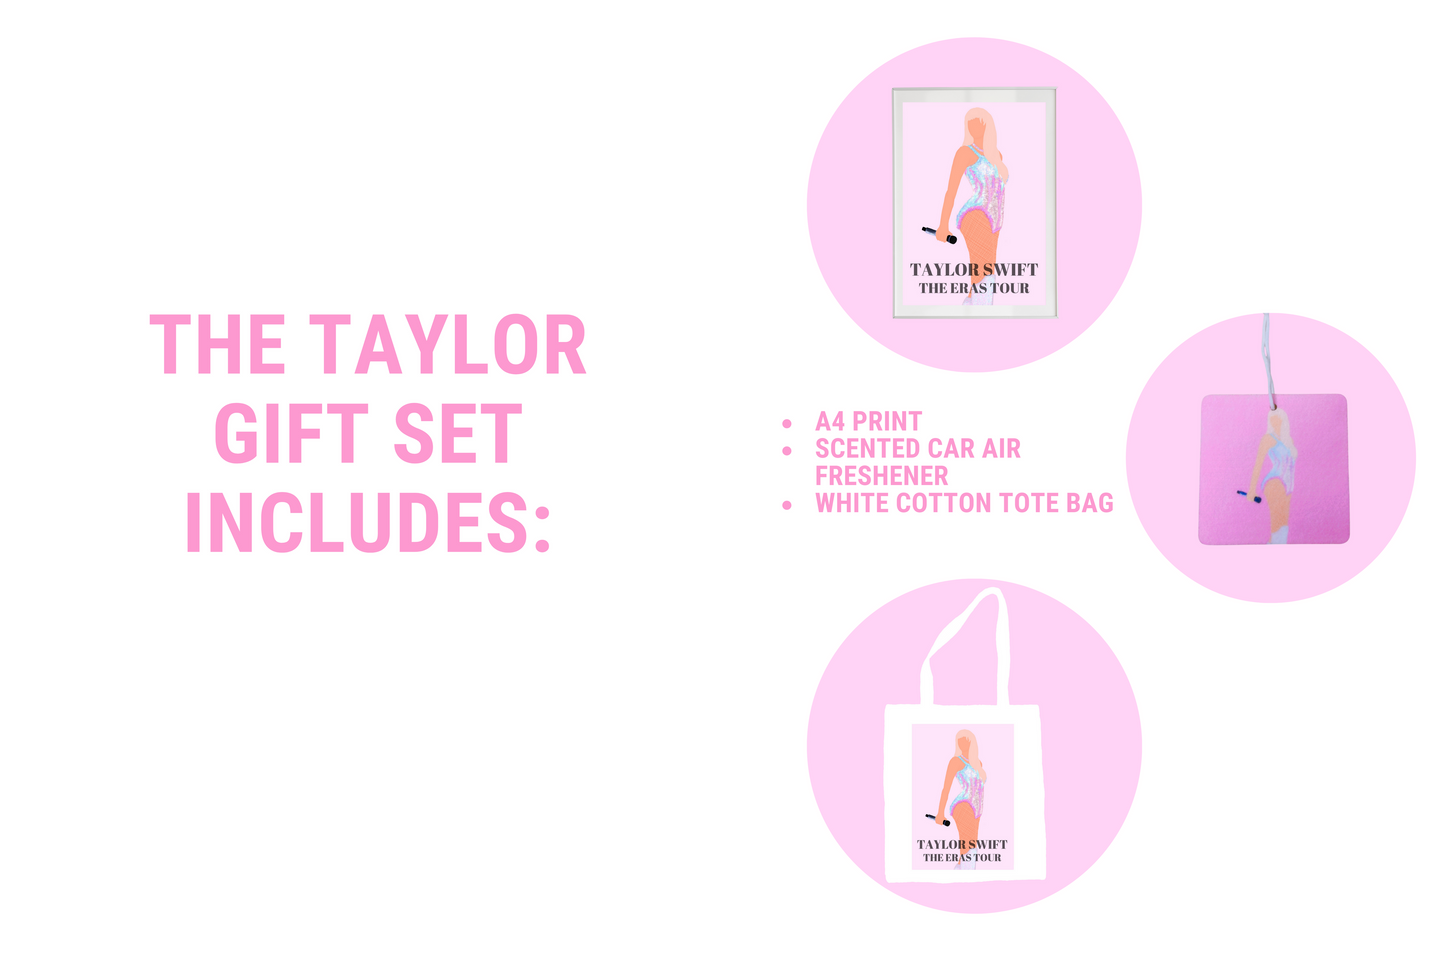 The Taylor Swift Collection